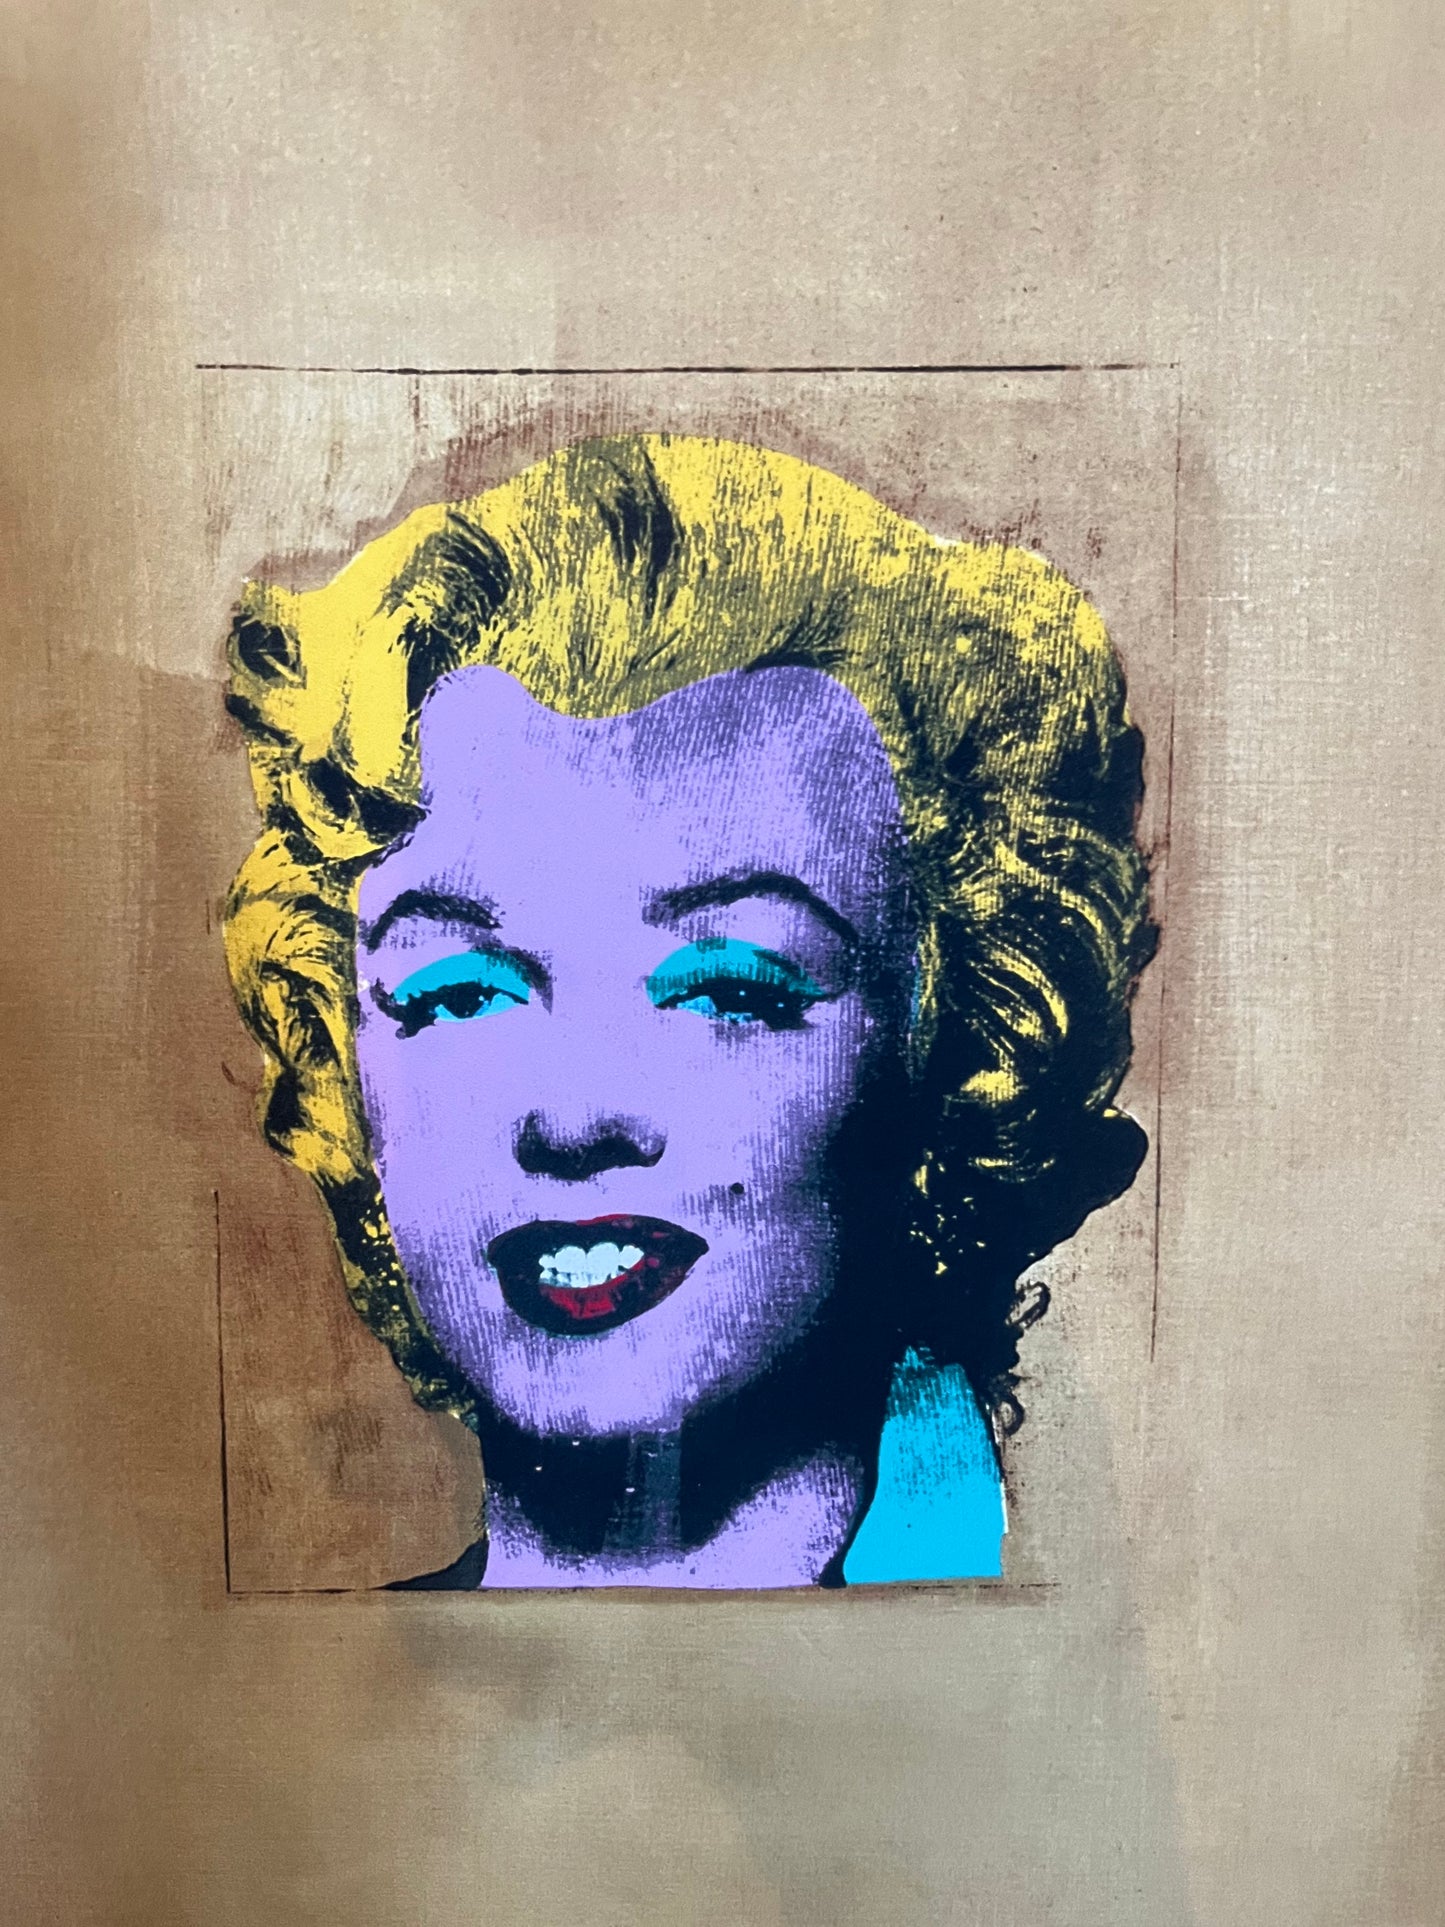 Andy Warhol, Gold Marilyn Monroe, 1962, Lithographie Offset